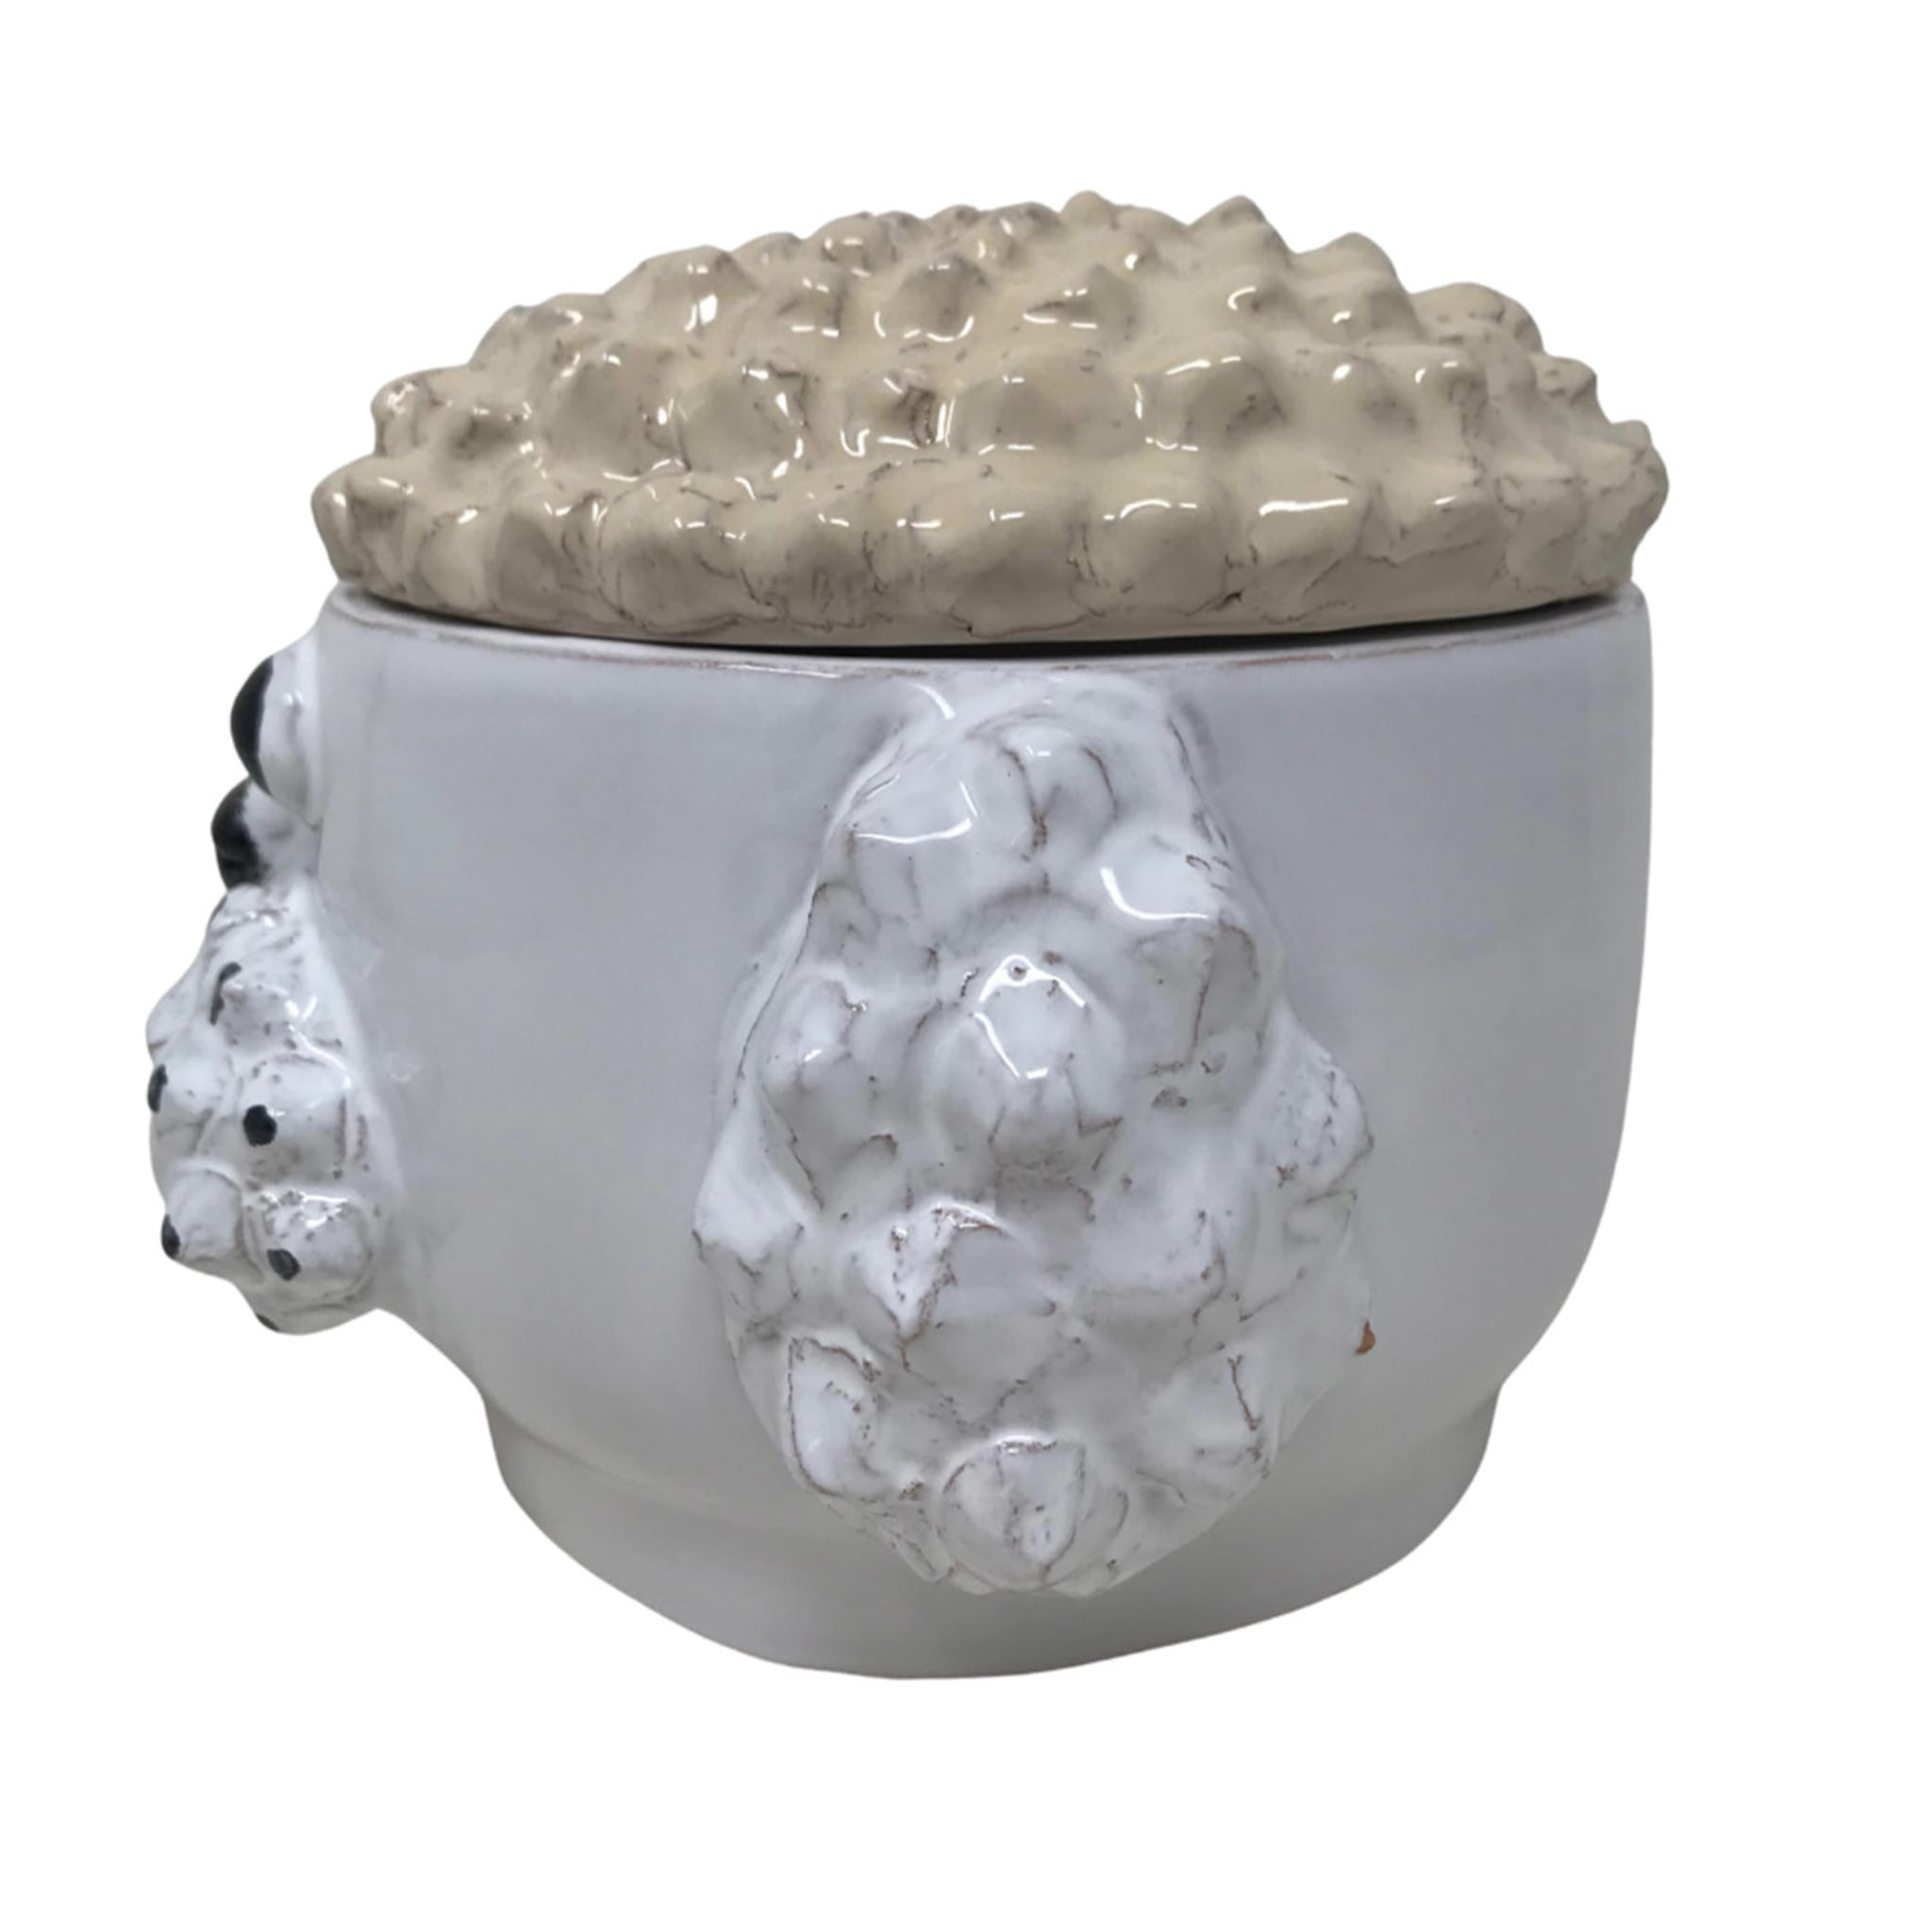 Small Cream and White Dog Container with Lid - Alternative view 2